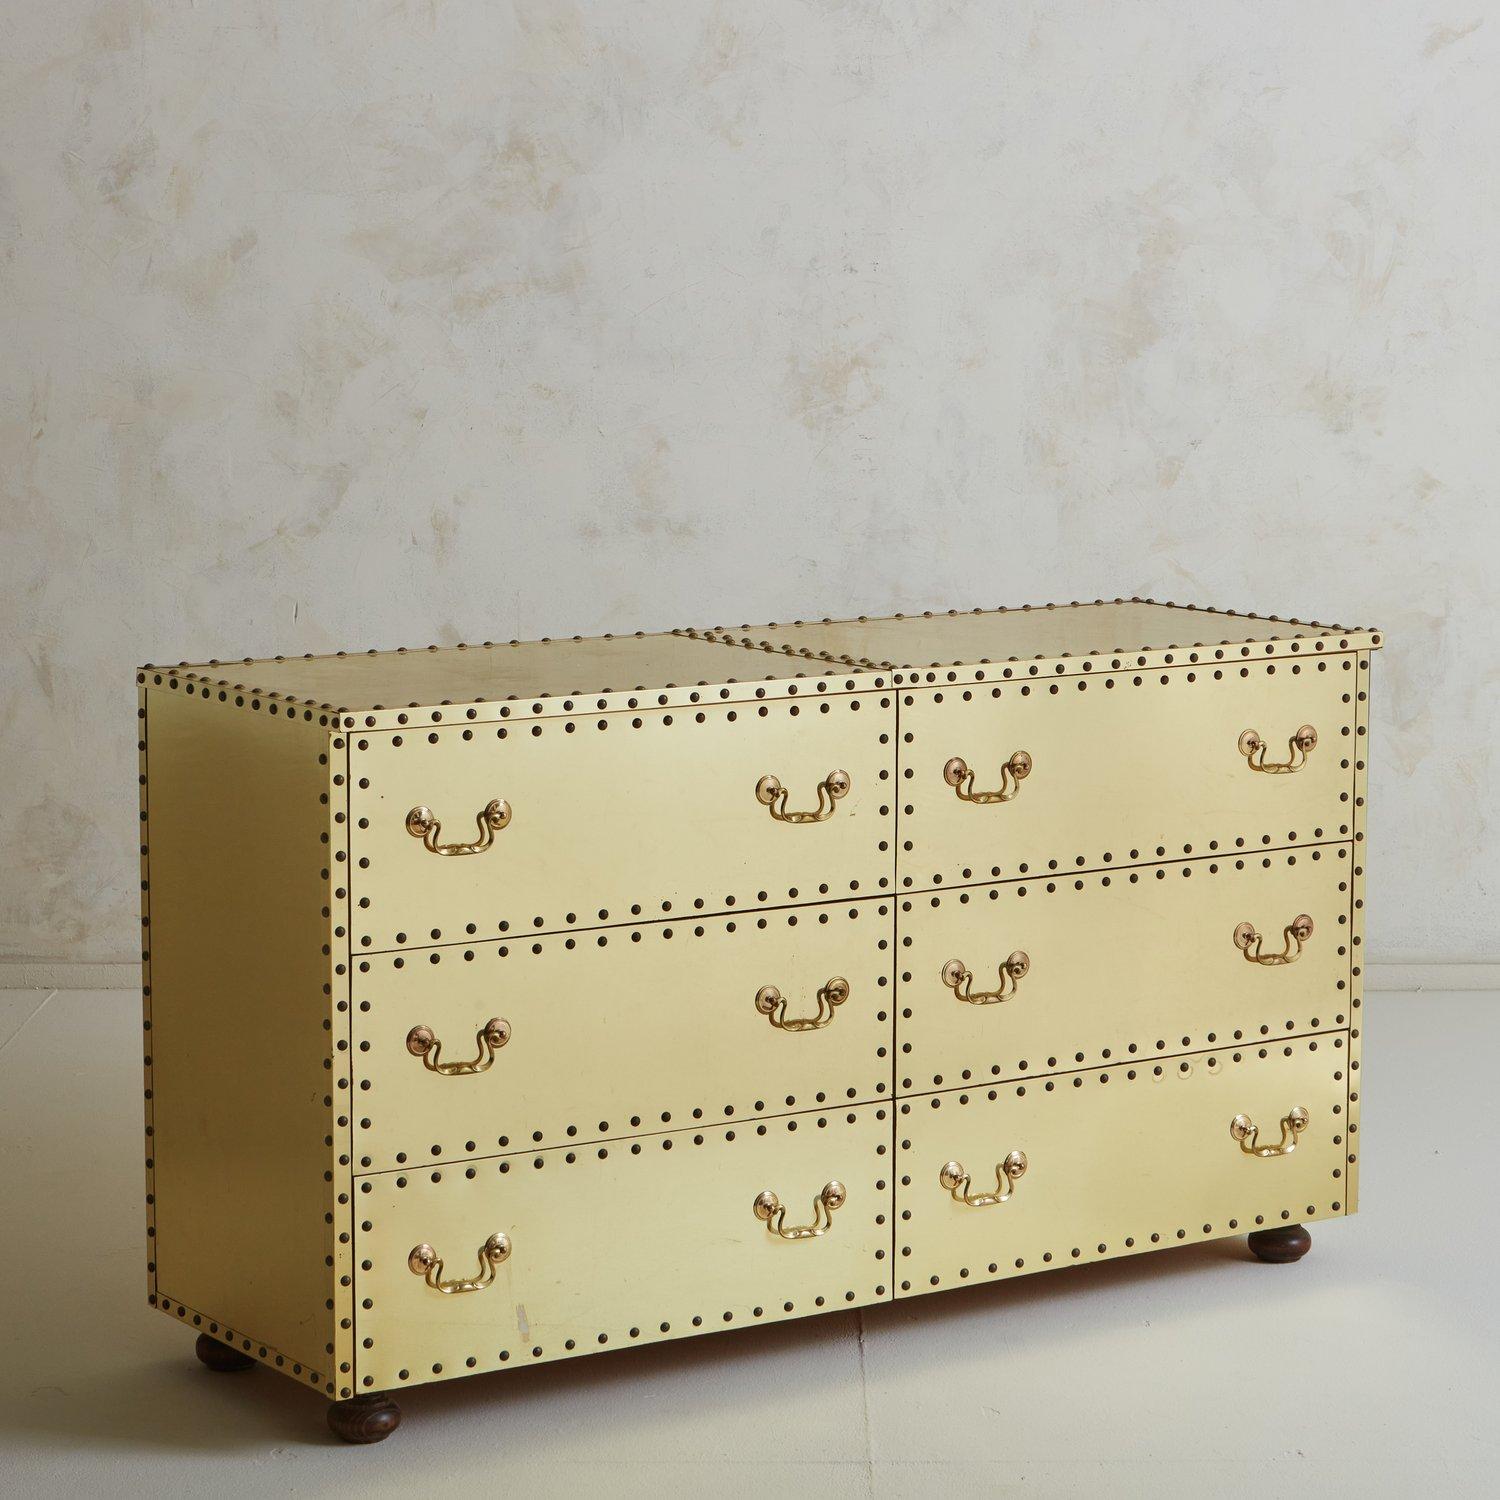 A vintage dresser clad in brass with beautiful stud detailing and brass hardware. This piece has six drawers, offering ample storage space. It stands on four oval wooden feet and has a wood backing. 20th Century.